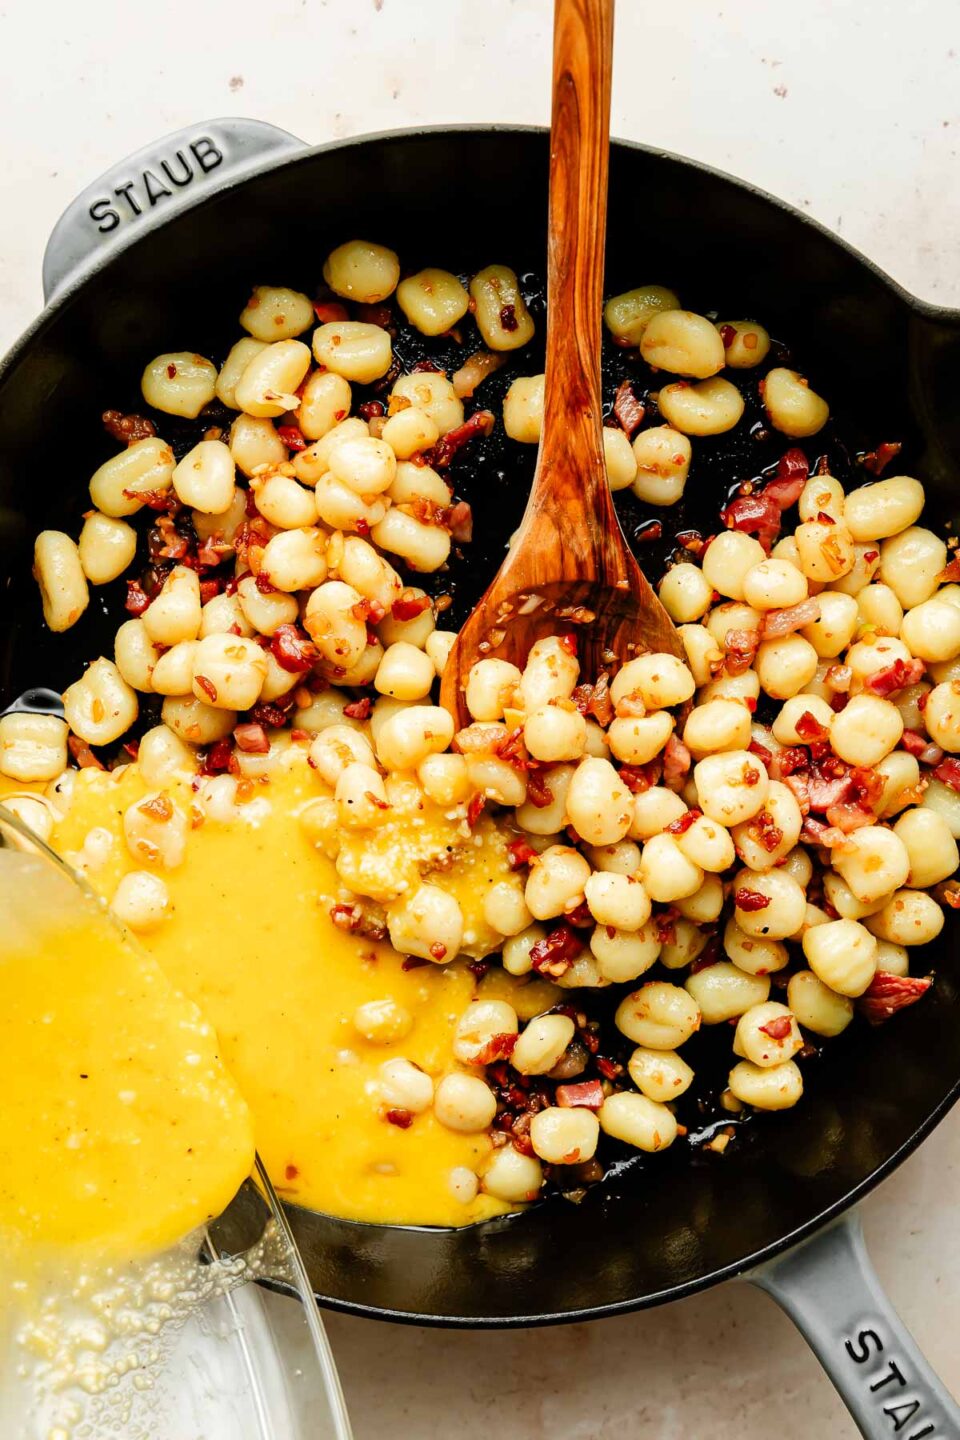 An overhead photo of sauce being poured over gnocchi and pancetta in a black cast-iron skillet atop a beige surface.